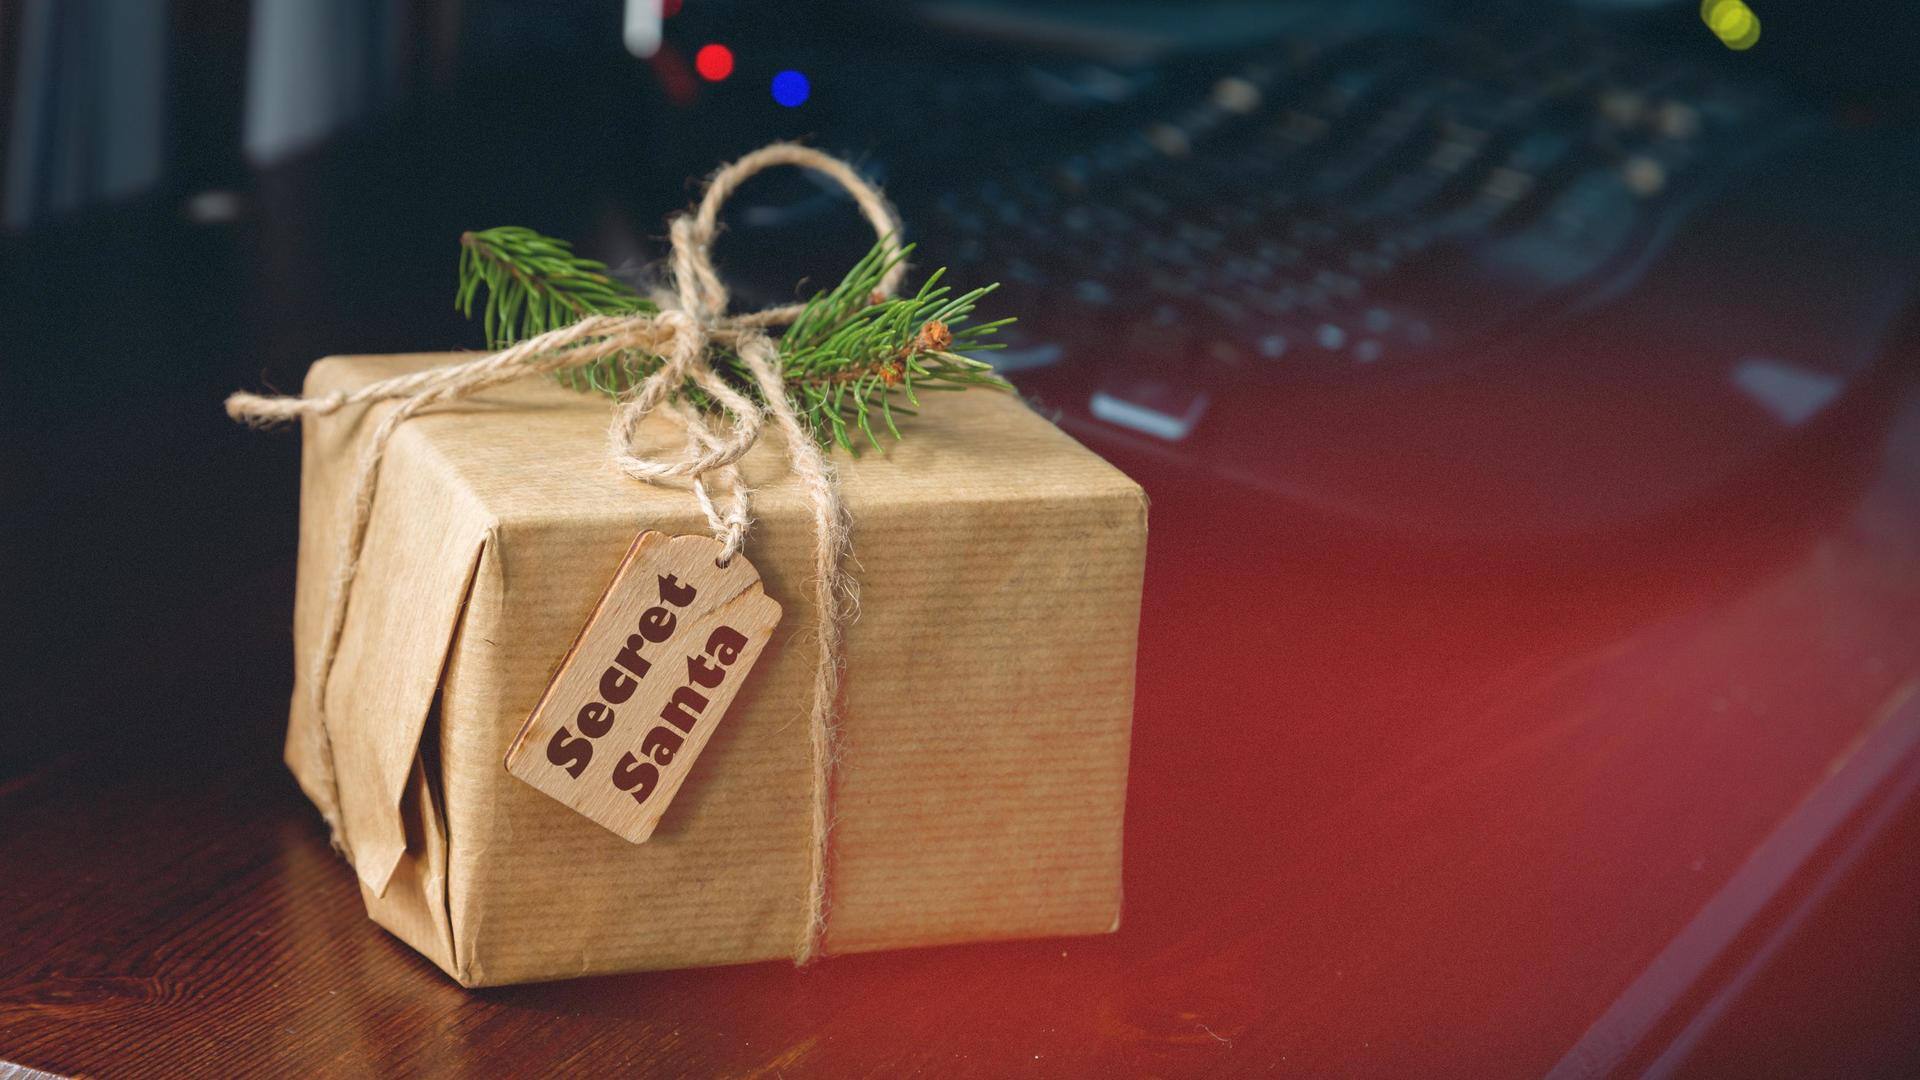 Secret Santa gifting guide: Here's how and what to gift